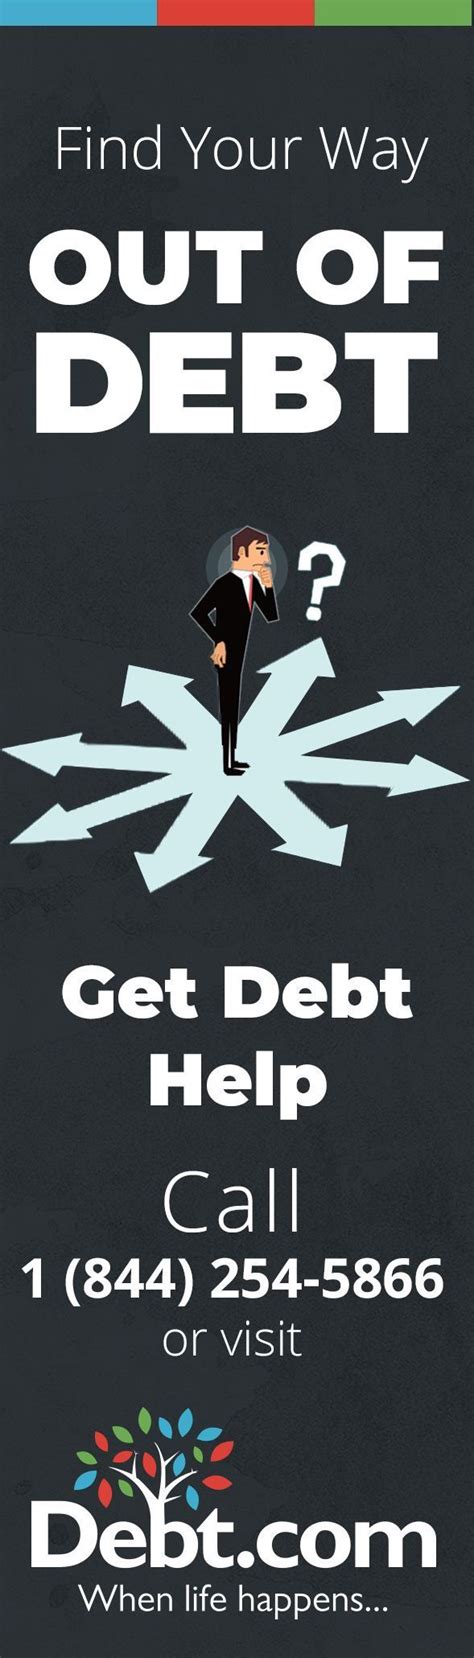 But if you're still undecided or might not file your case for a long time, stopping your credit card payments can cause unnecessary damage. Lost in credit card debt? Stop struggling to pay back everything you owe! See if you qualify for ...